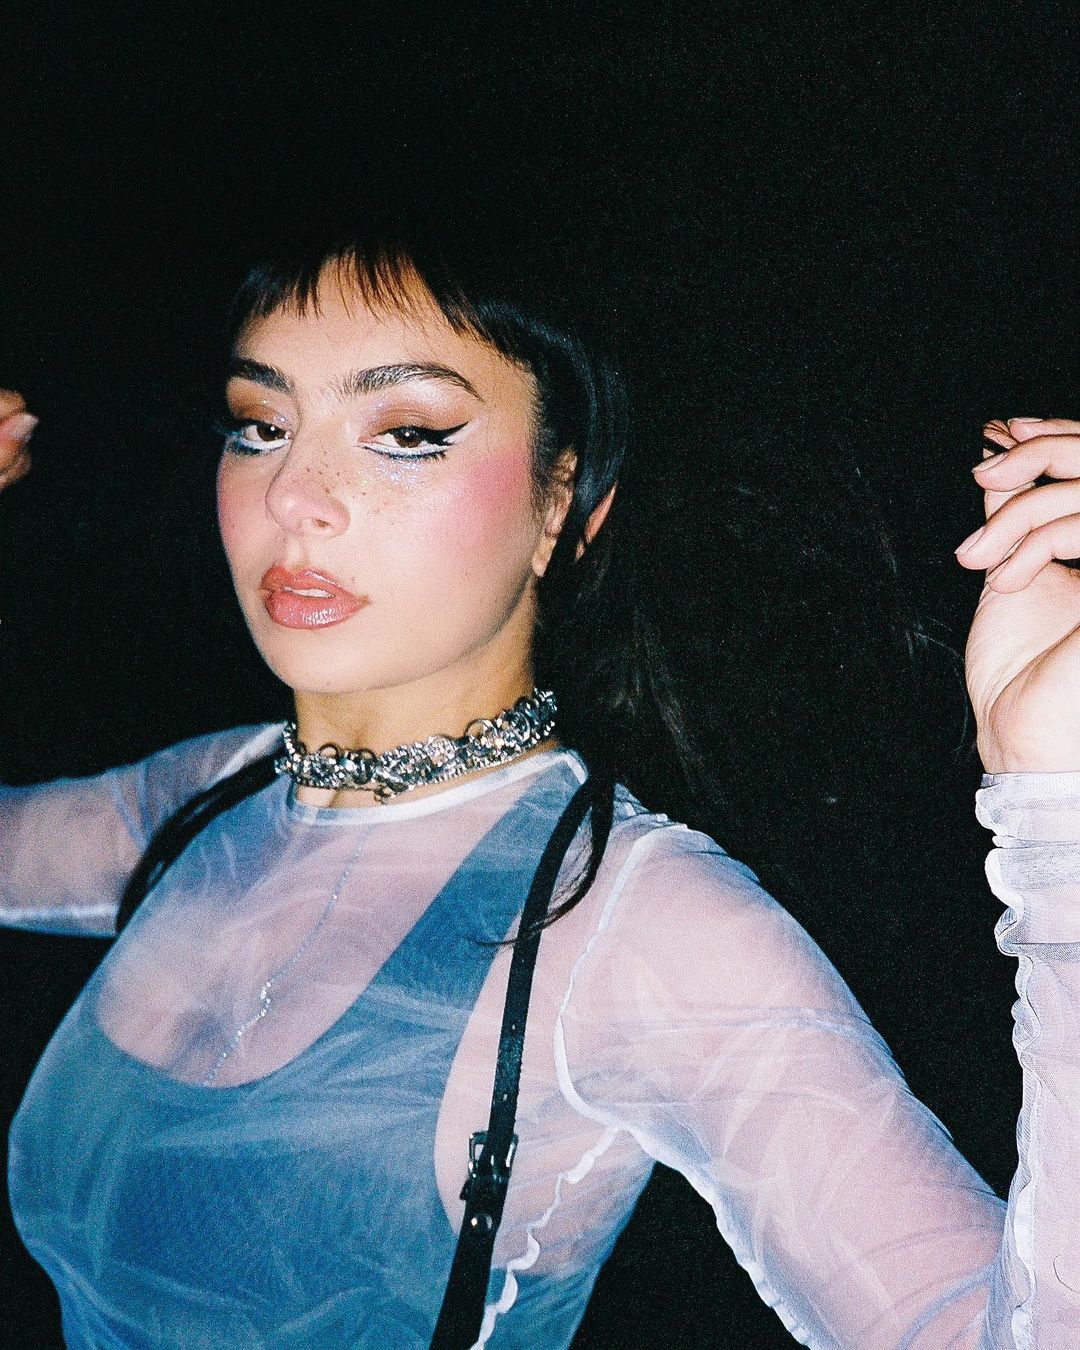 Photos n°61 : Charli XCX Looks Hot In It!